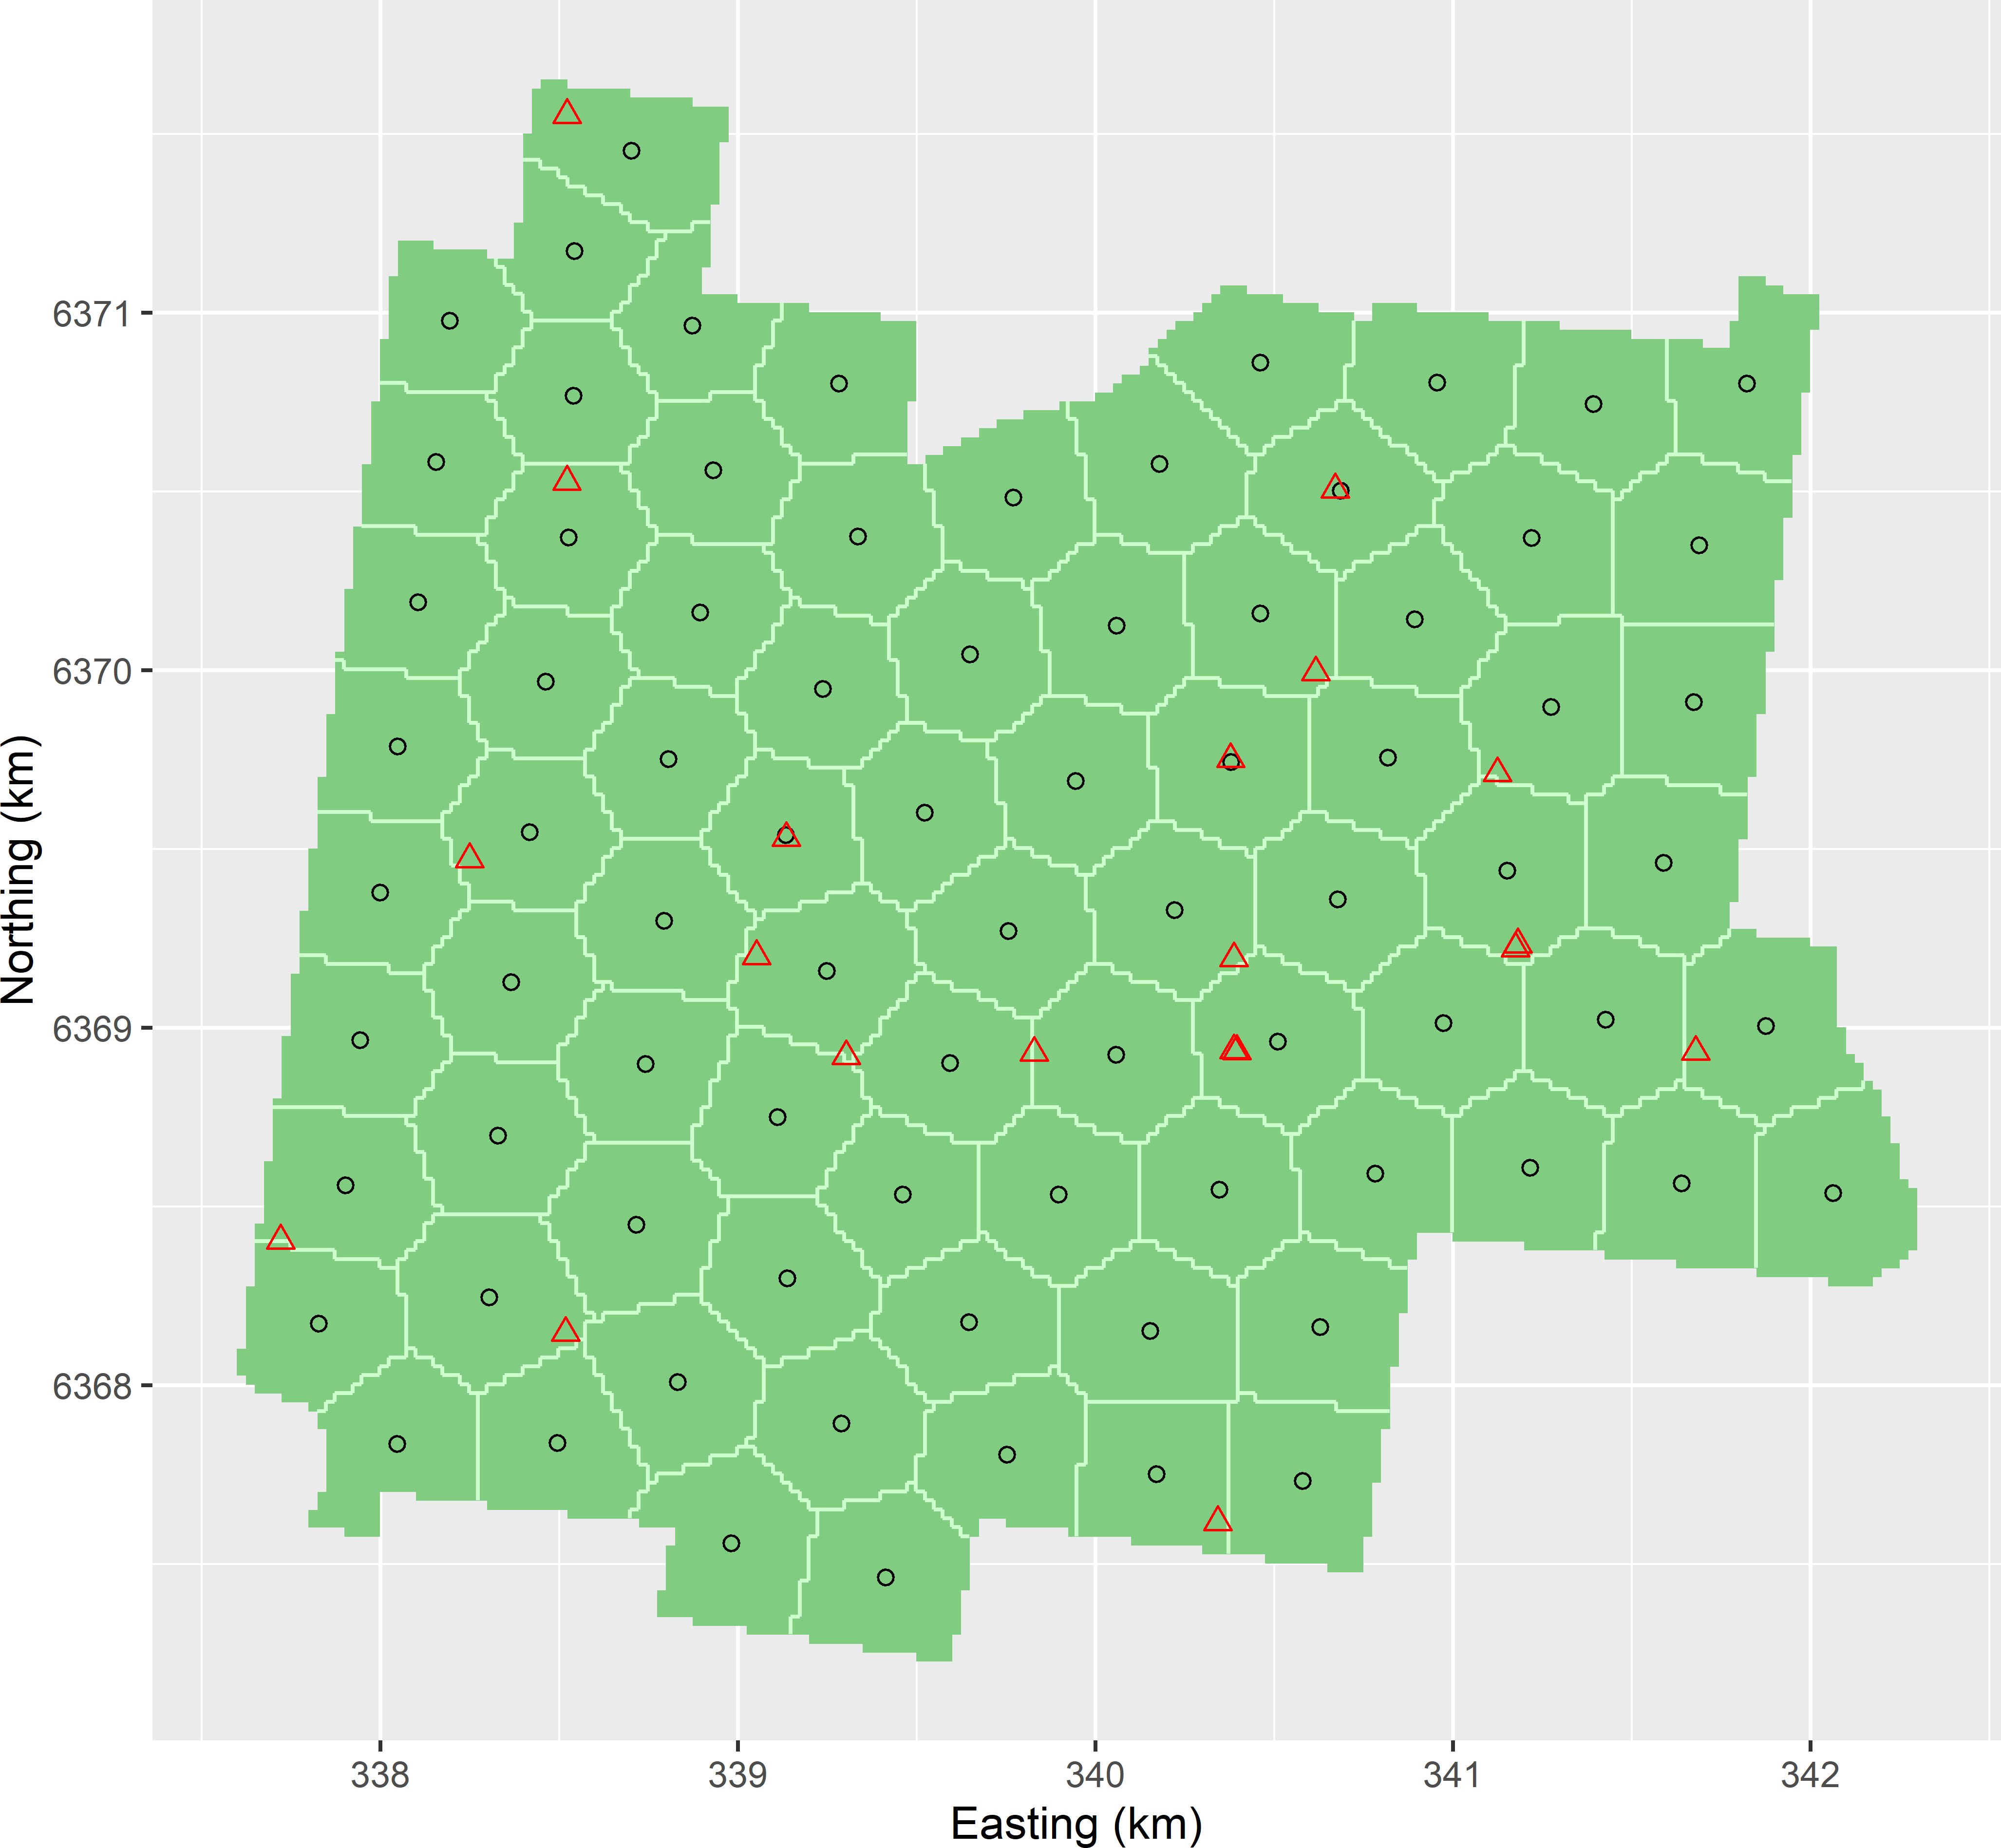 Optimised sample of 20 points supplemented to a spatial coverage sample of 80 points, using MEAC as a minimisation criterion. The sampling pattern of the supplemental sample is optimised with an exponential semivariogram with a range of 200 m and a ratio of spatial dependence of 0.8.